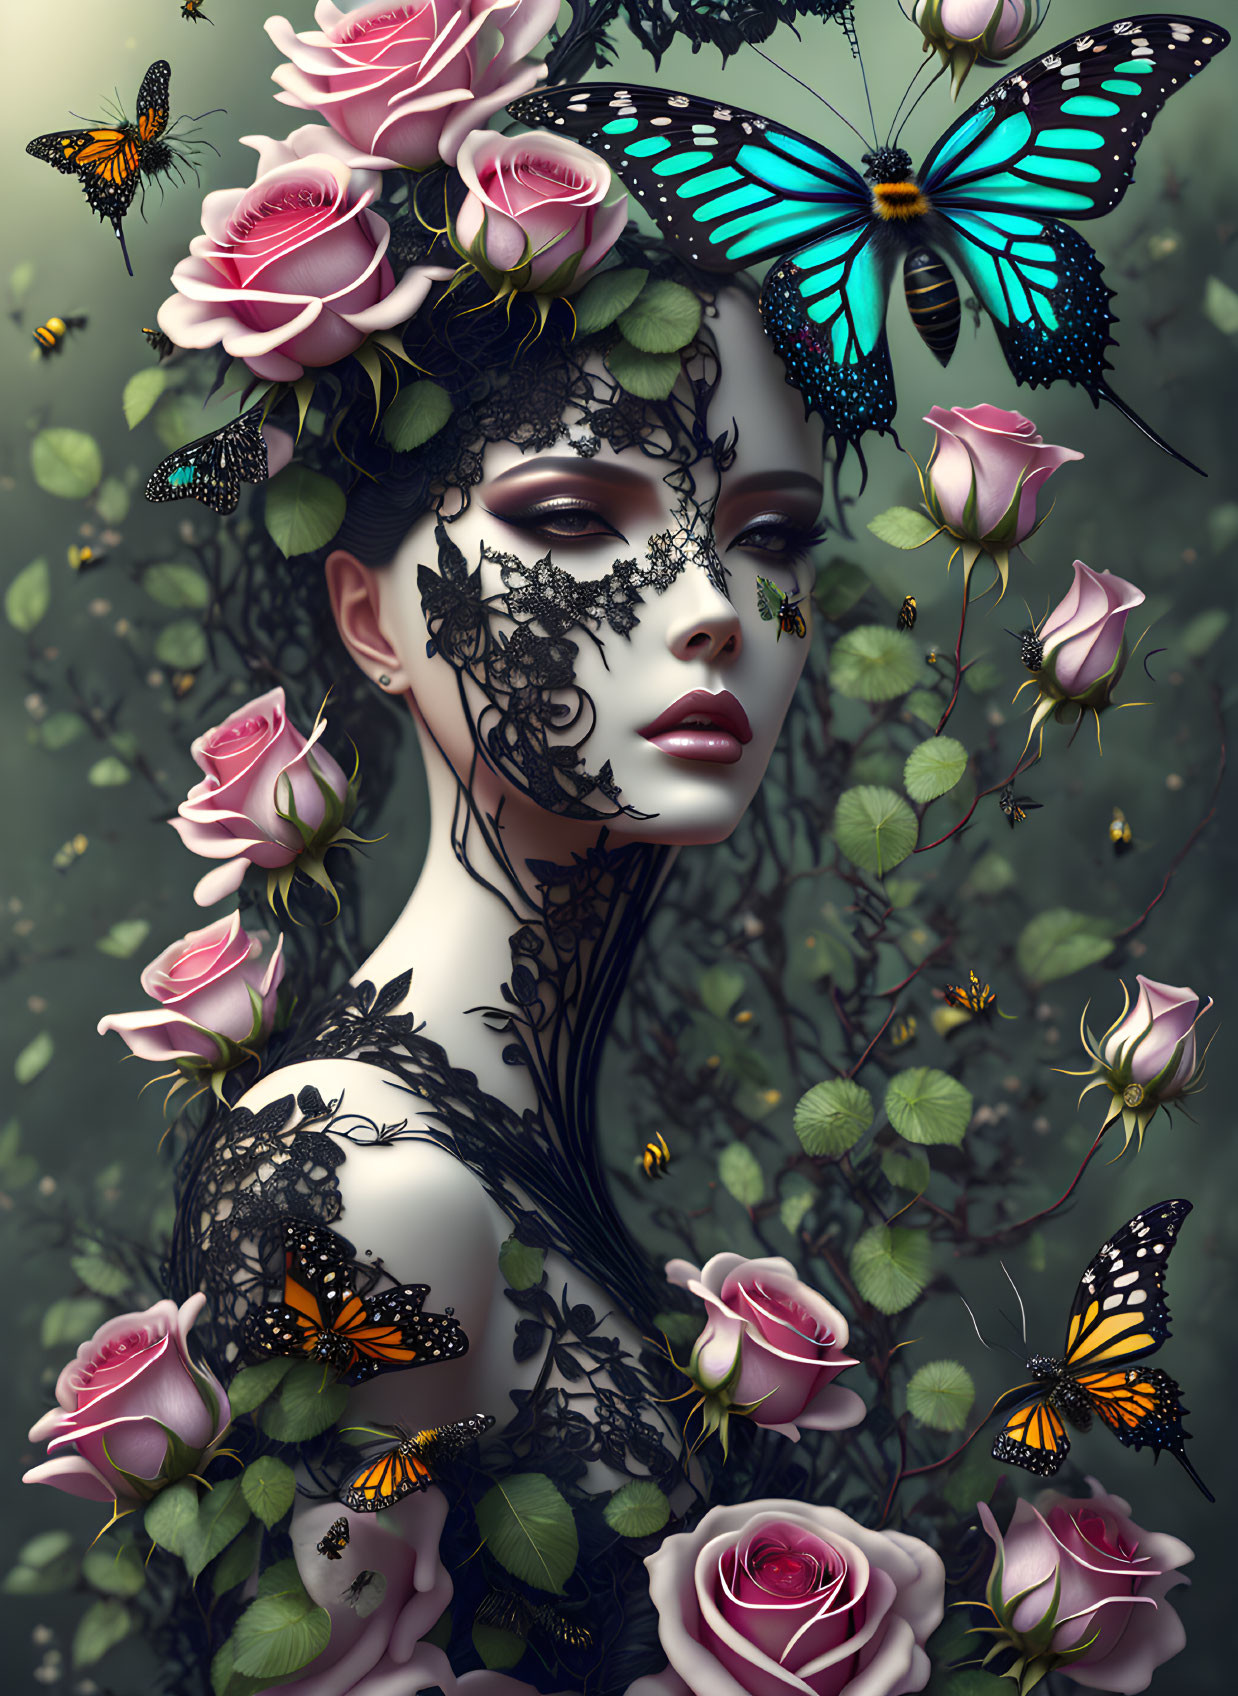 Surreal portrait of woman with roses, butterflies, black lace mask, greens and pinks